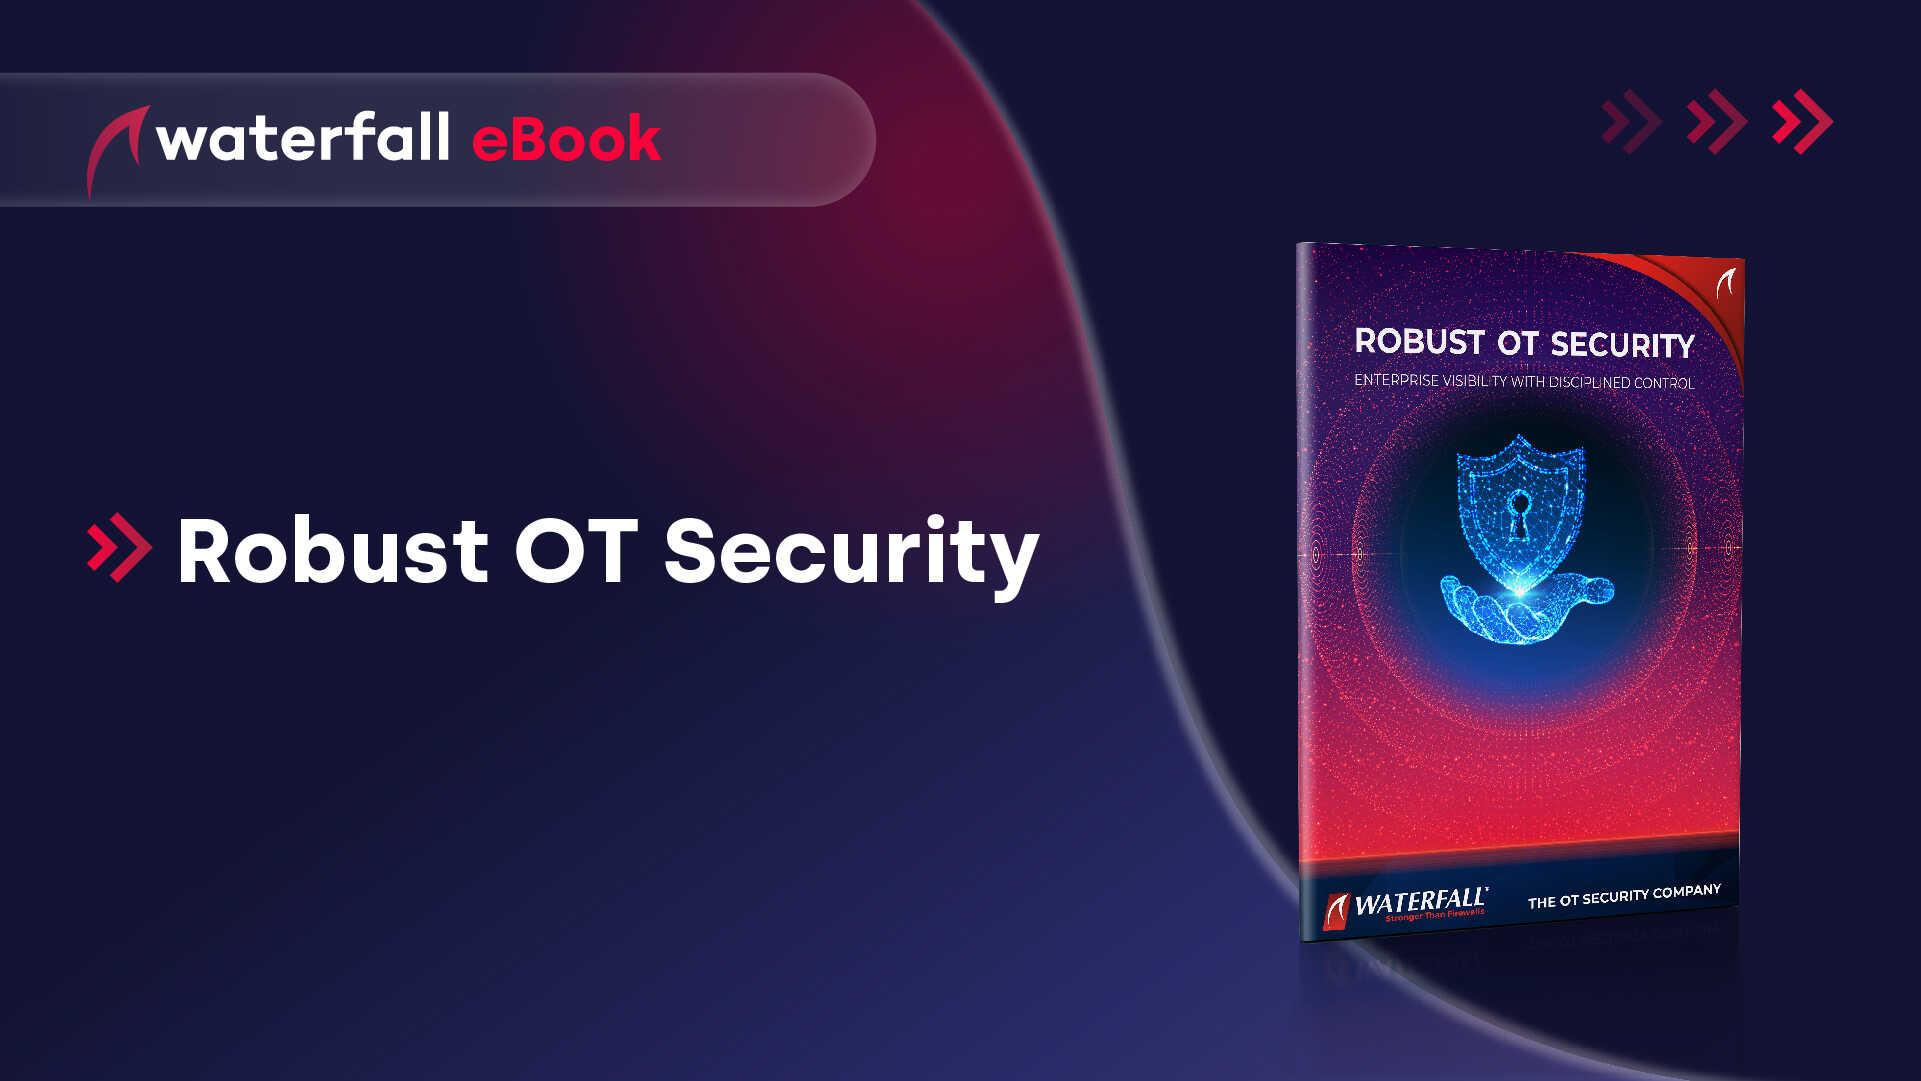 Robust OT Security with Disciplined Control eBook